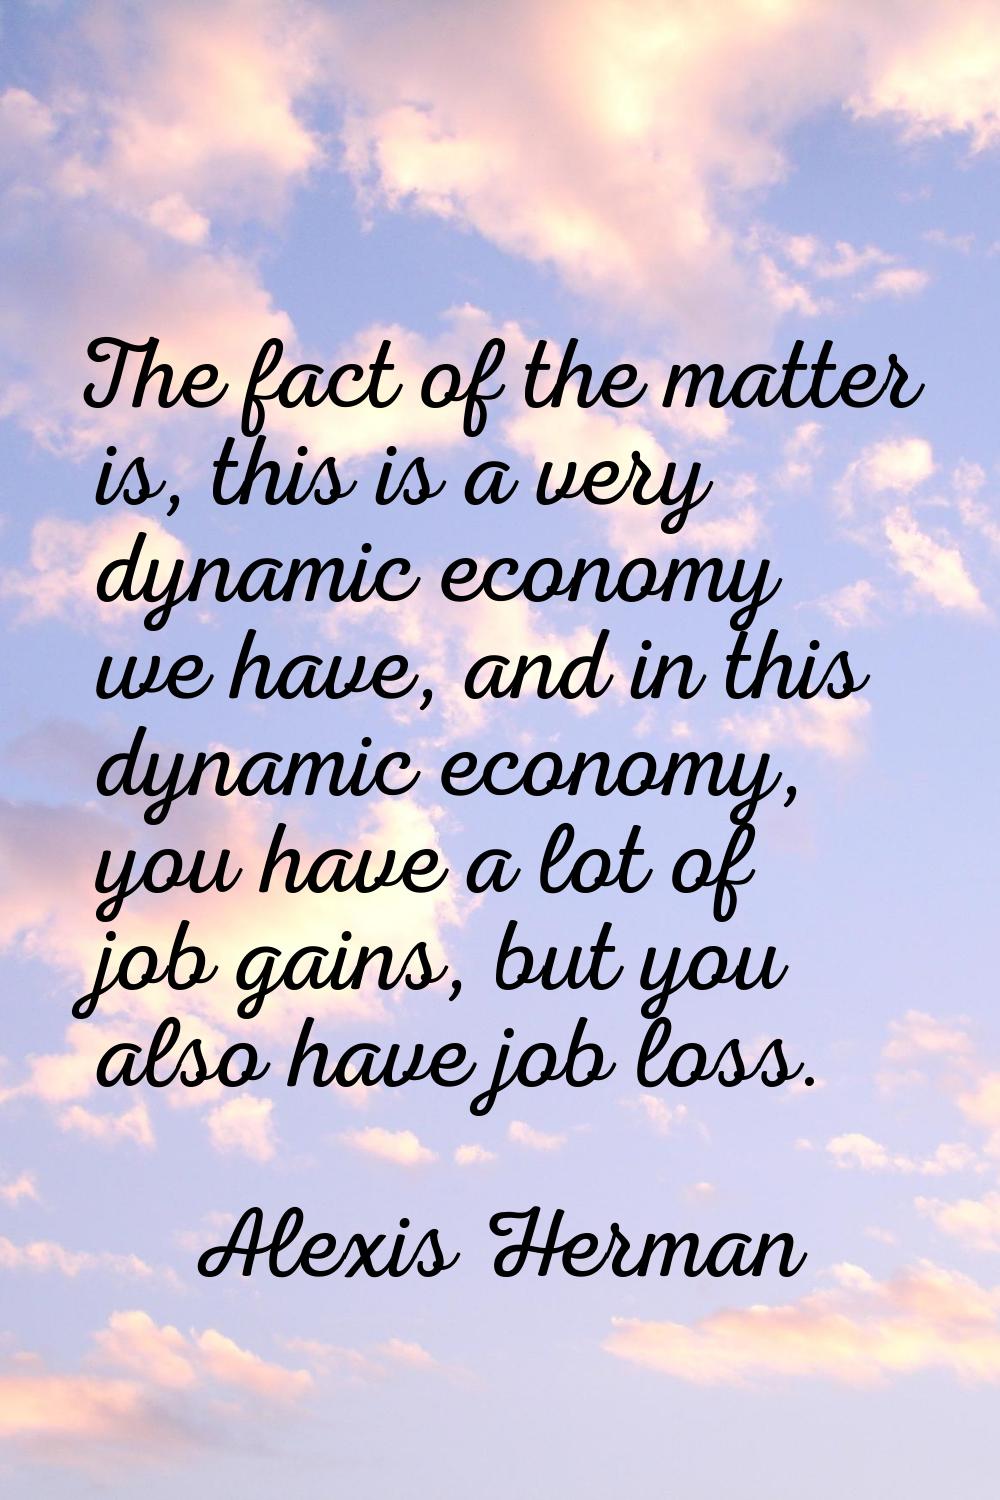 The fact of the matter is, this is a very dynamic economy we have, and in this dynamic economy, you